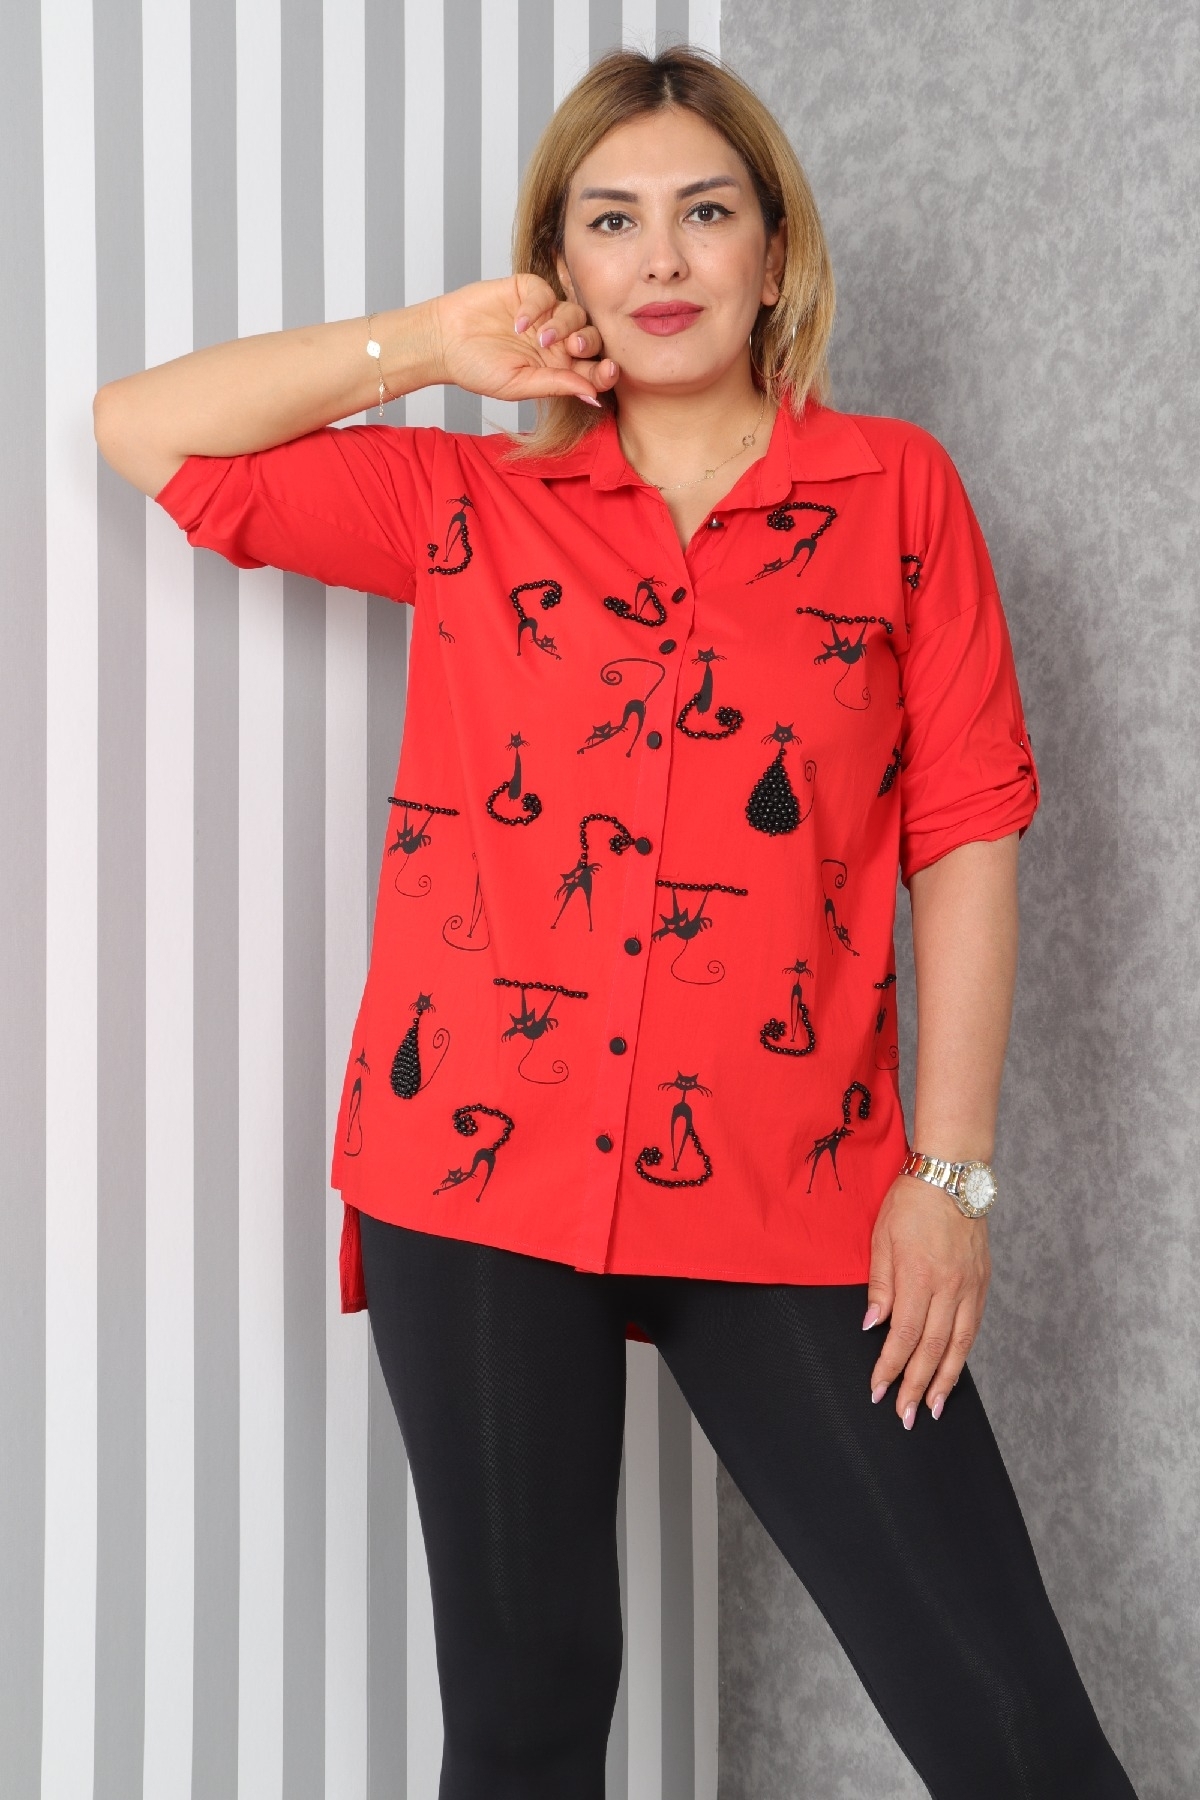 Asymmetric long sleeve front buttoned shirt with cat print, embellished with pearls